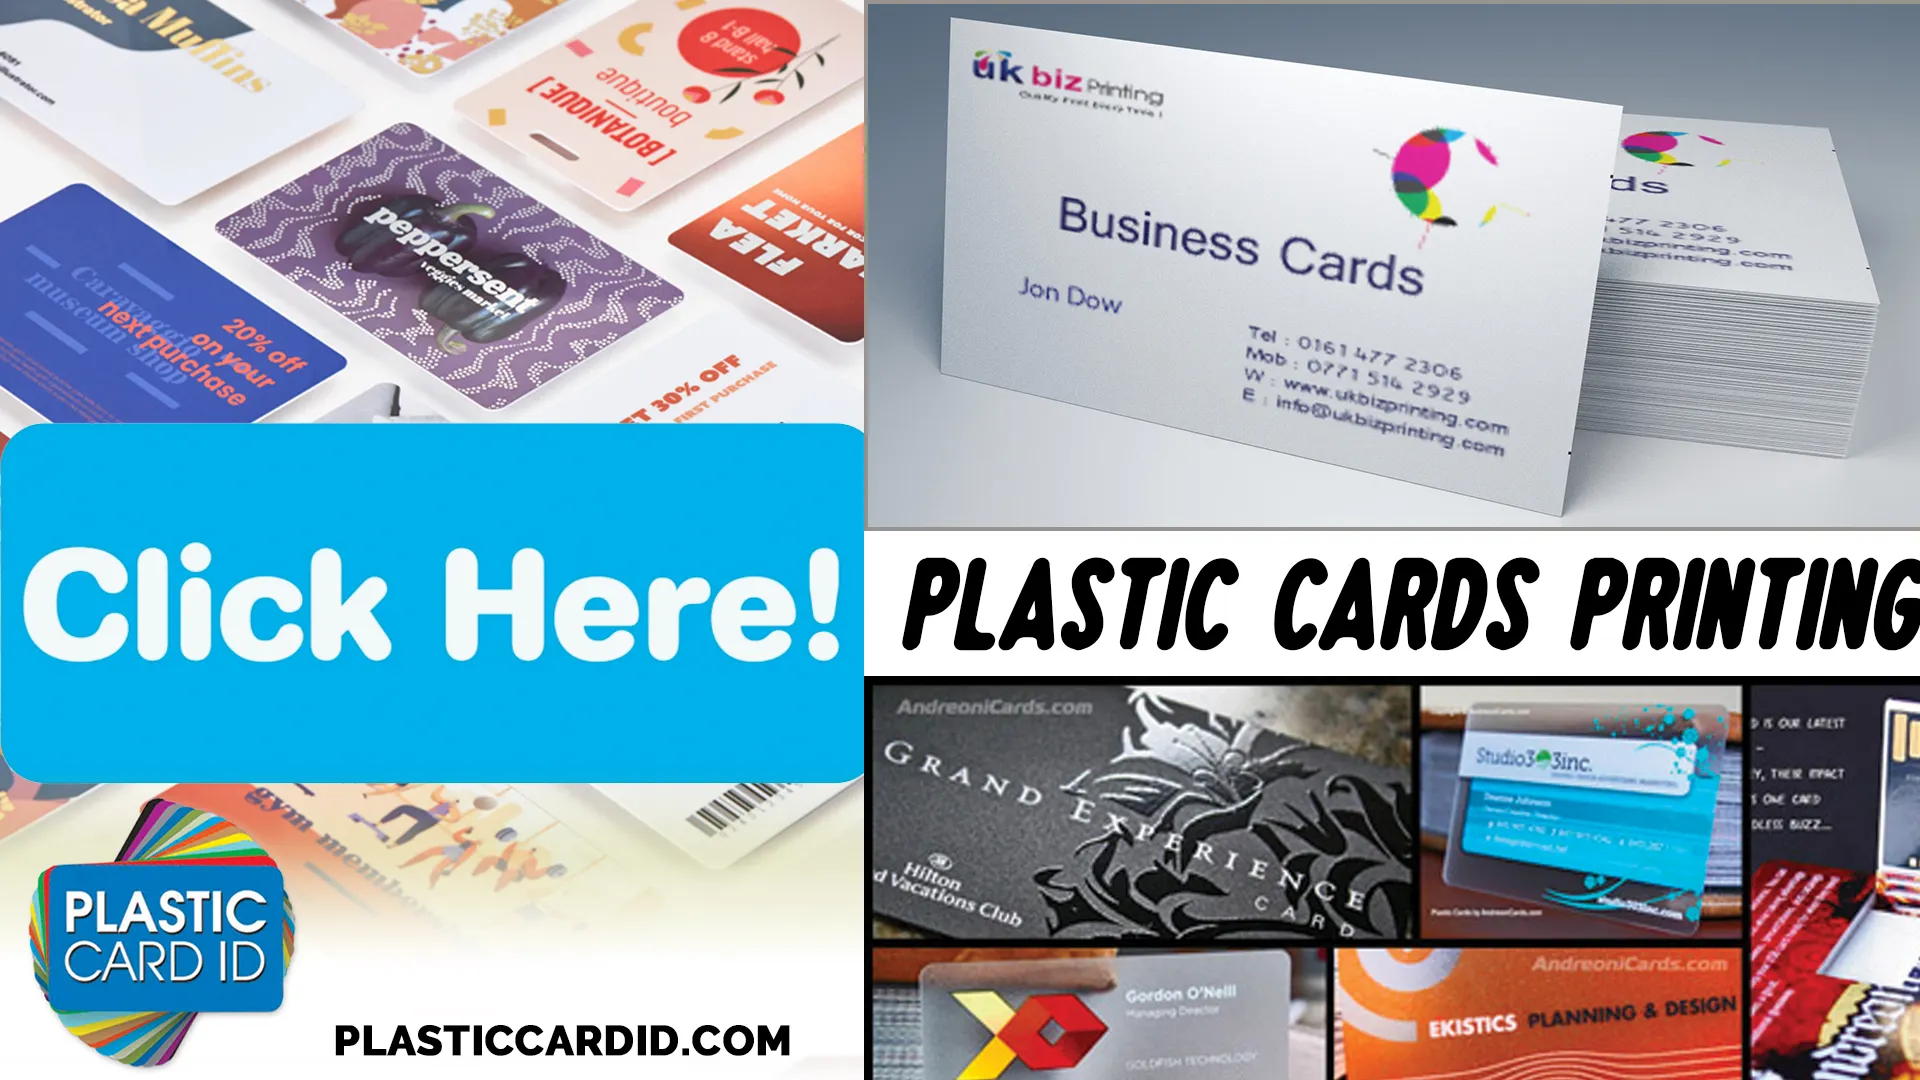 Expanding Your Reach with Card Printers and Supplies